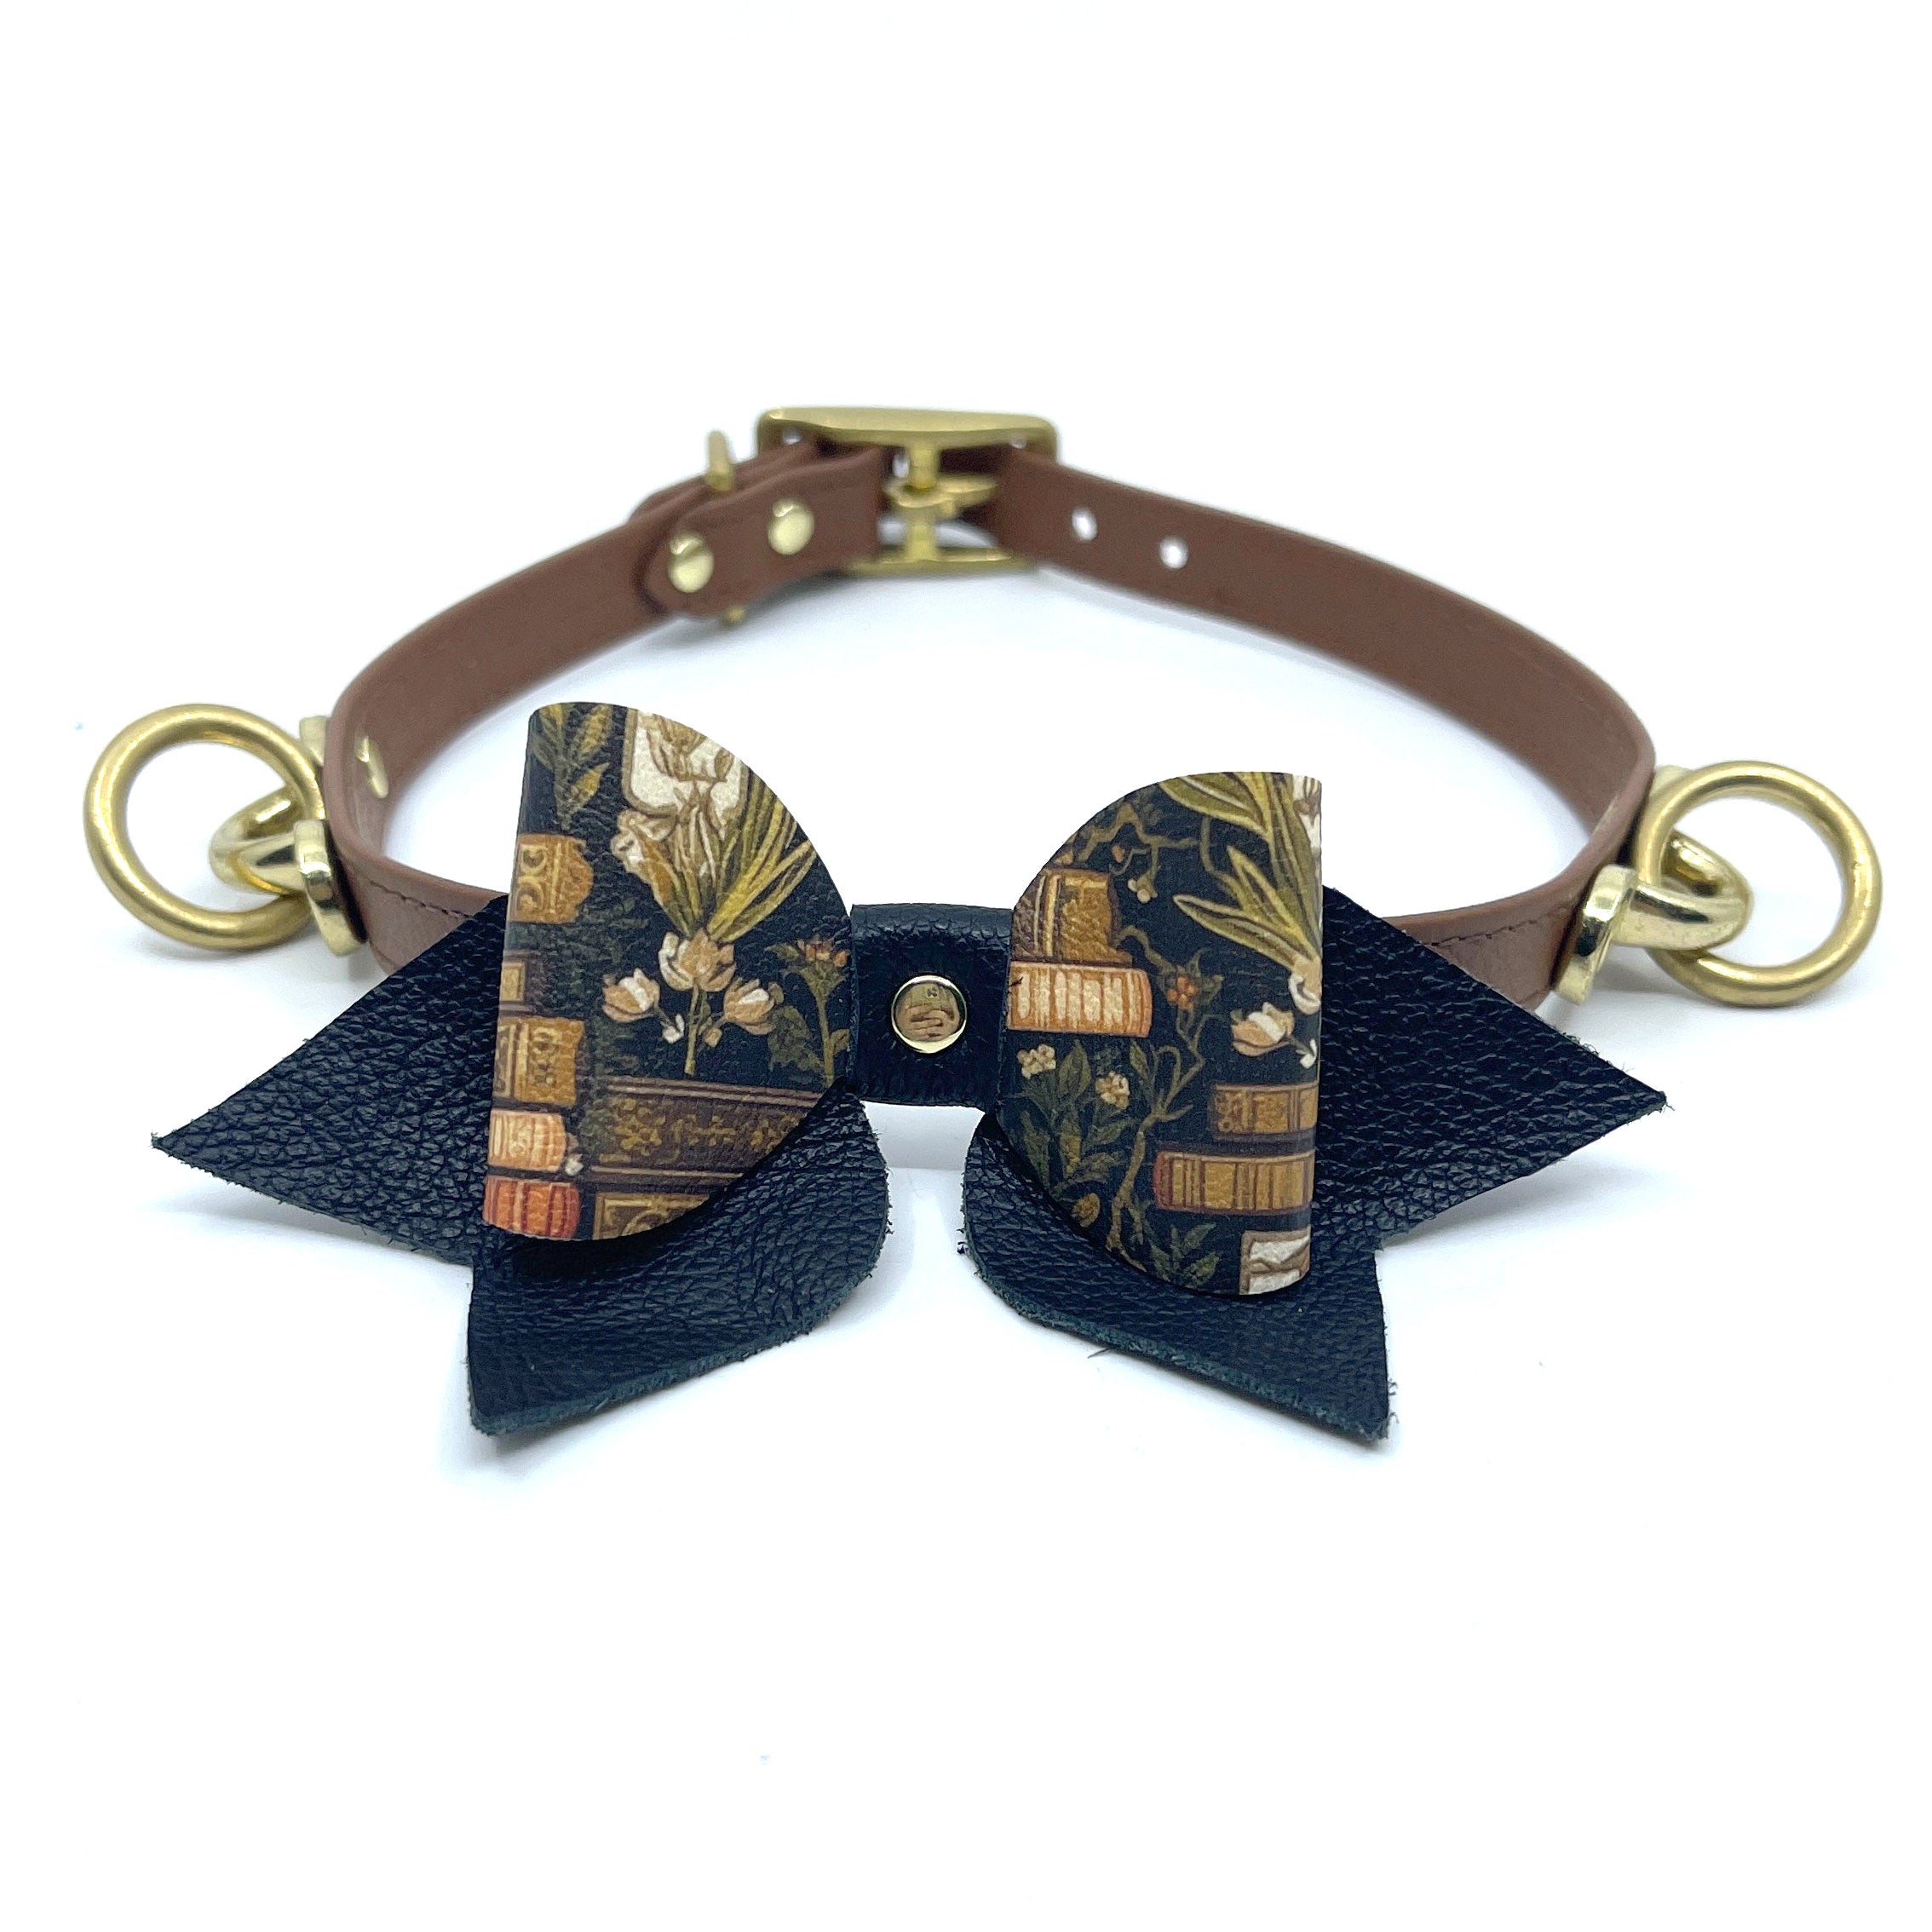 Chewy Vuitton Lead & Collar (No Bow)